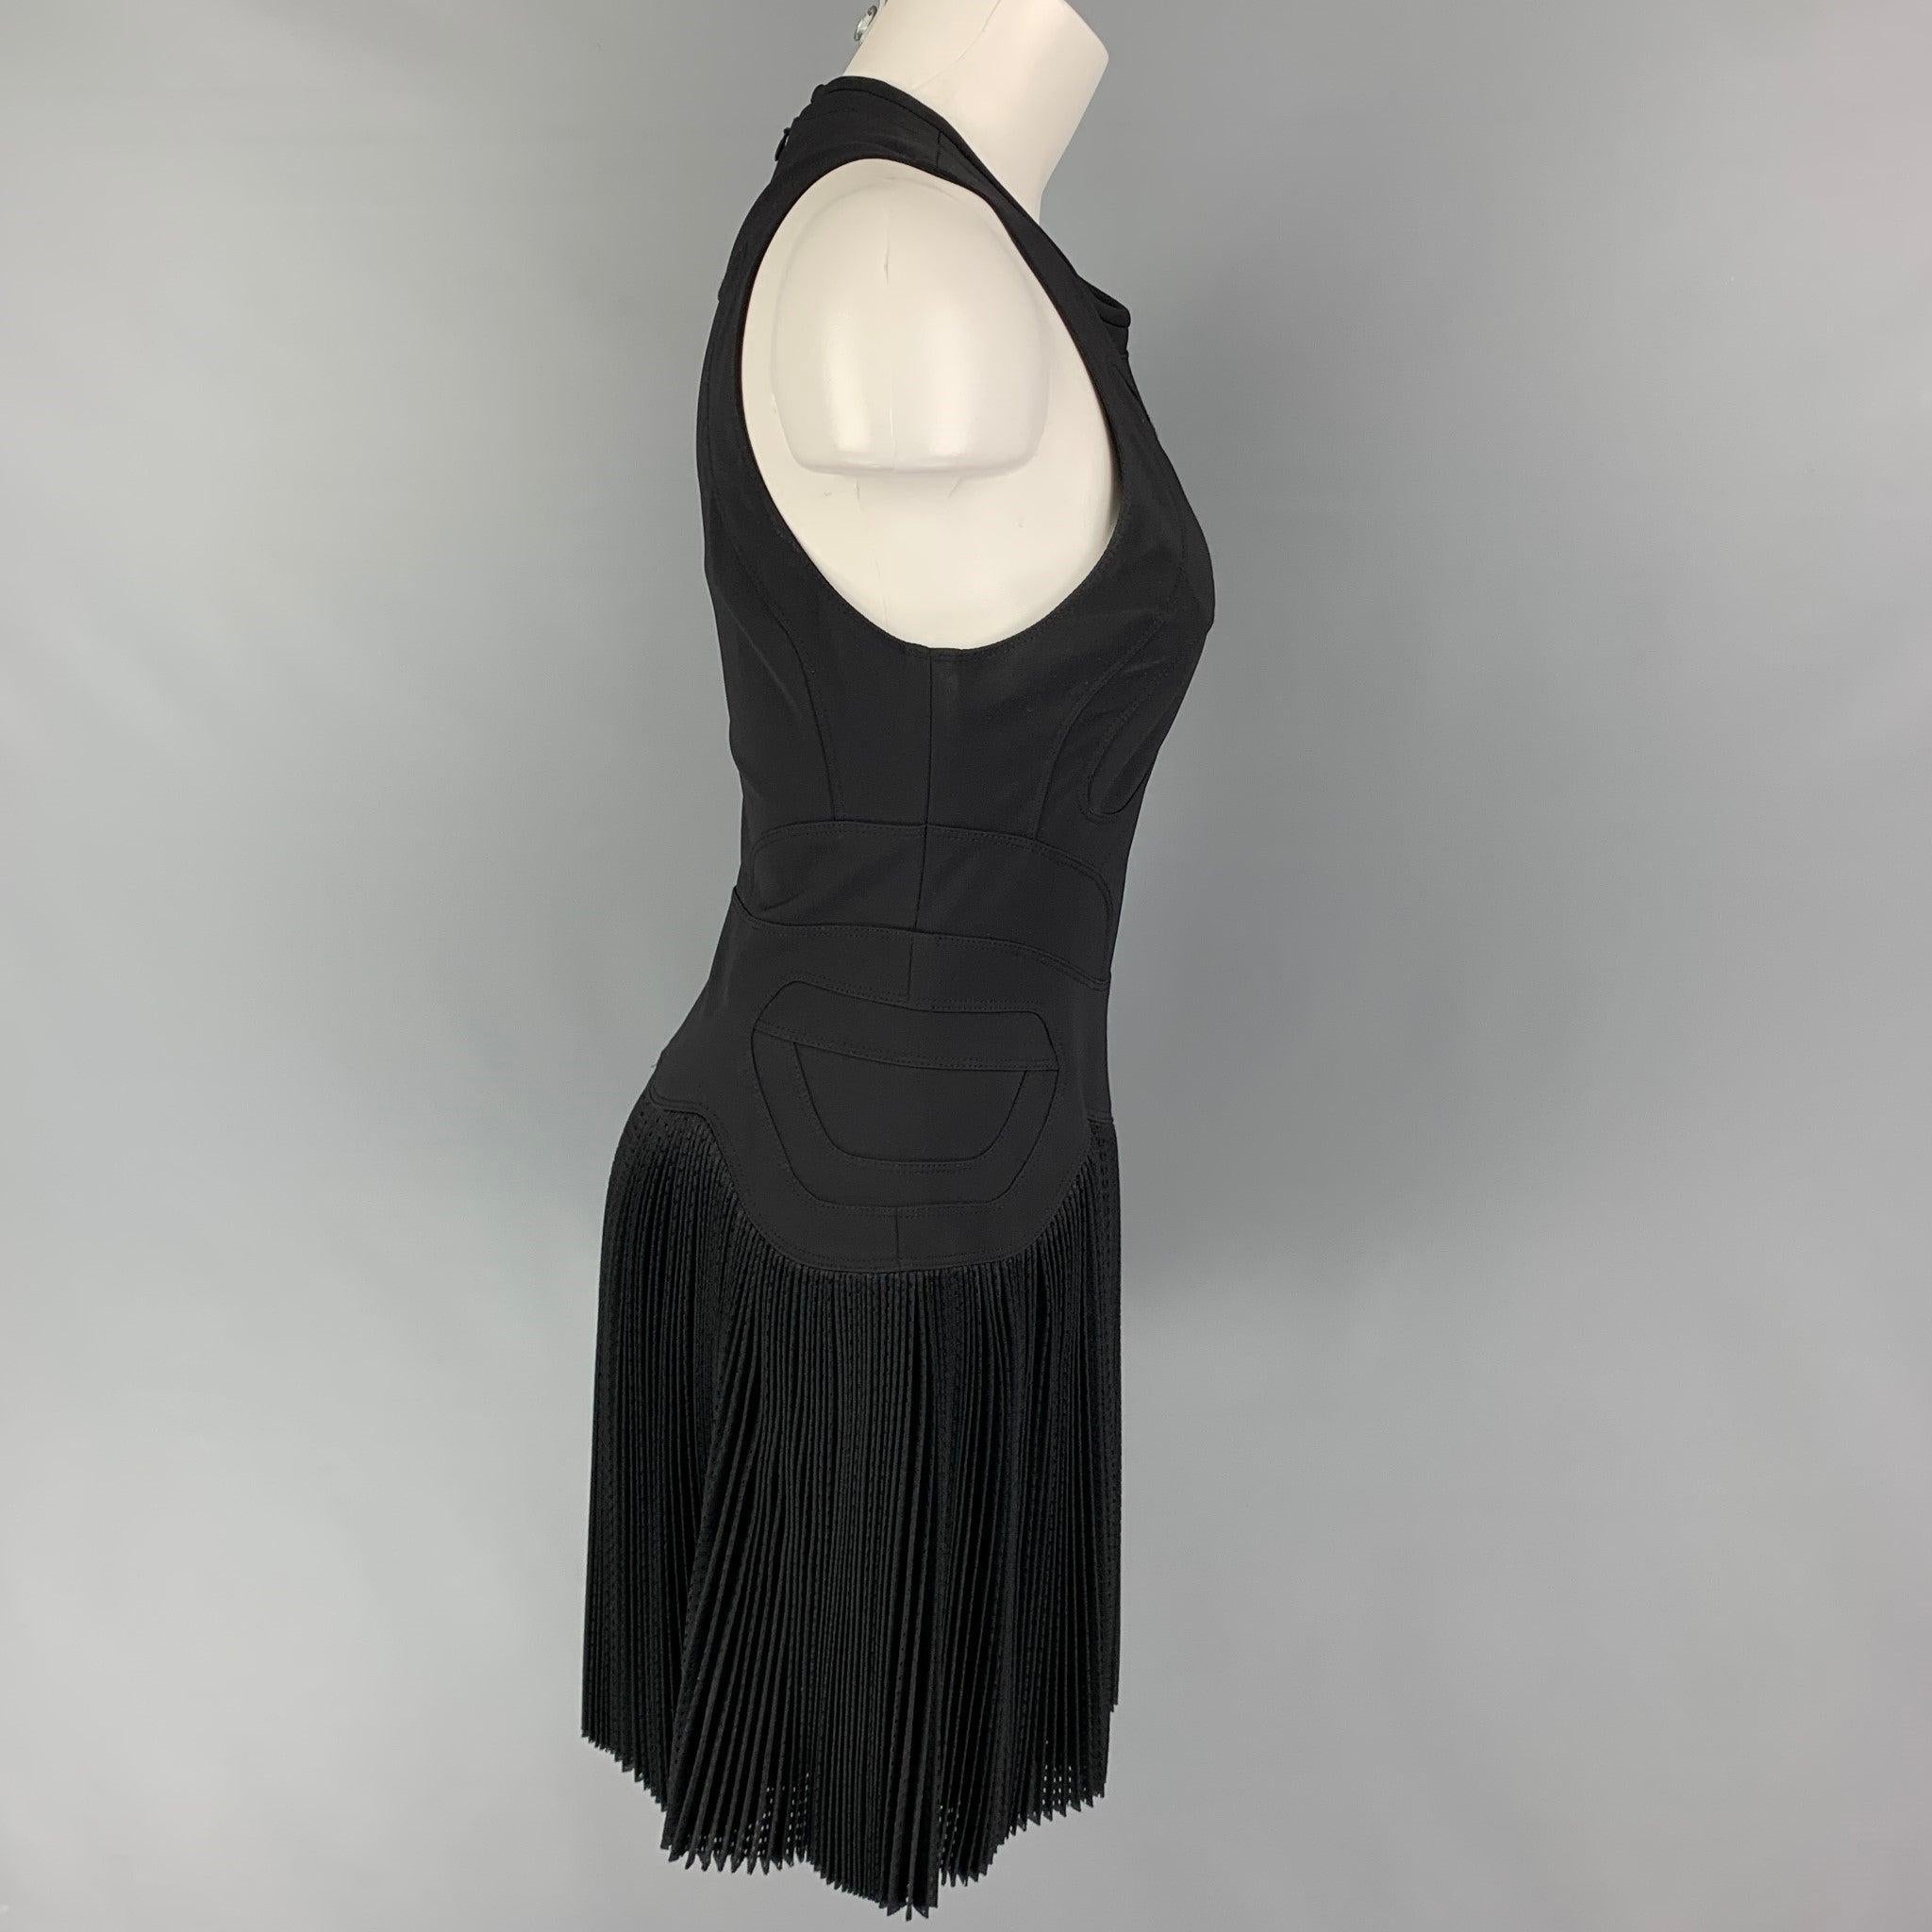 ALEXANDER WANG dress comes black polyamide featuring top stitching, sleeveless, pleated mesh skirt, and a back zip up closure. Good Pre-Owned Condition. Light discoloration at under arms. As-Is.  

Marked:   10  

Measurements: 
  Bust: 32 inches 